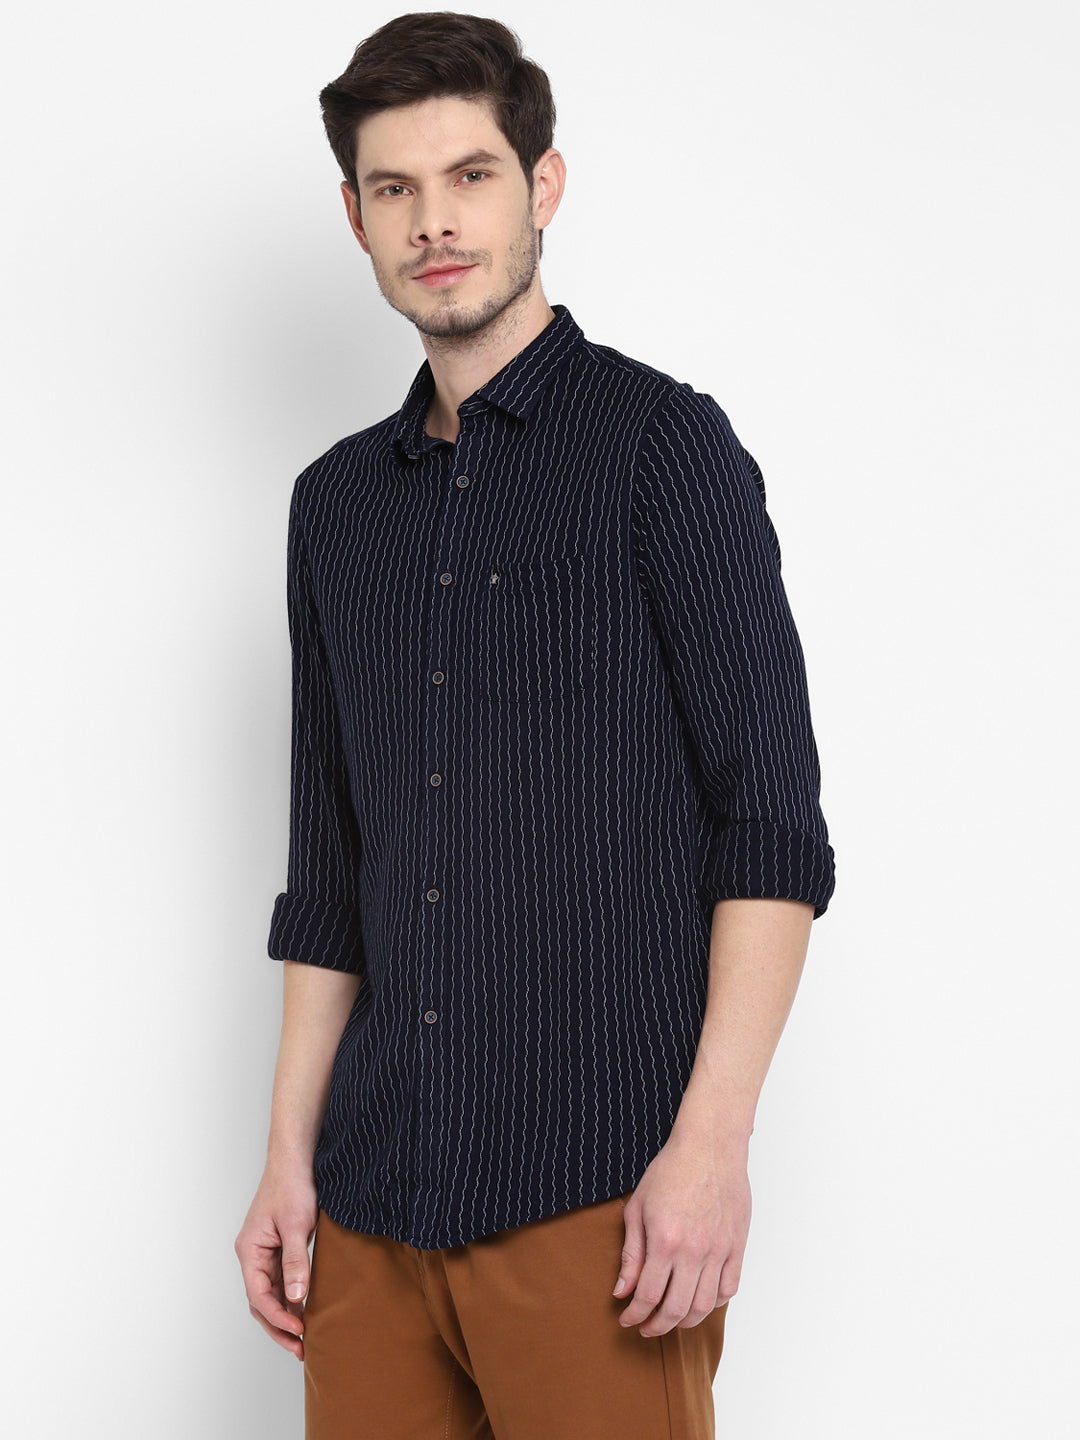 Striped Navy Blue Slim Fit Casual Shirt